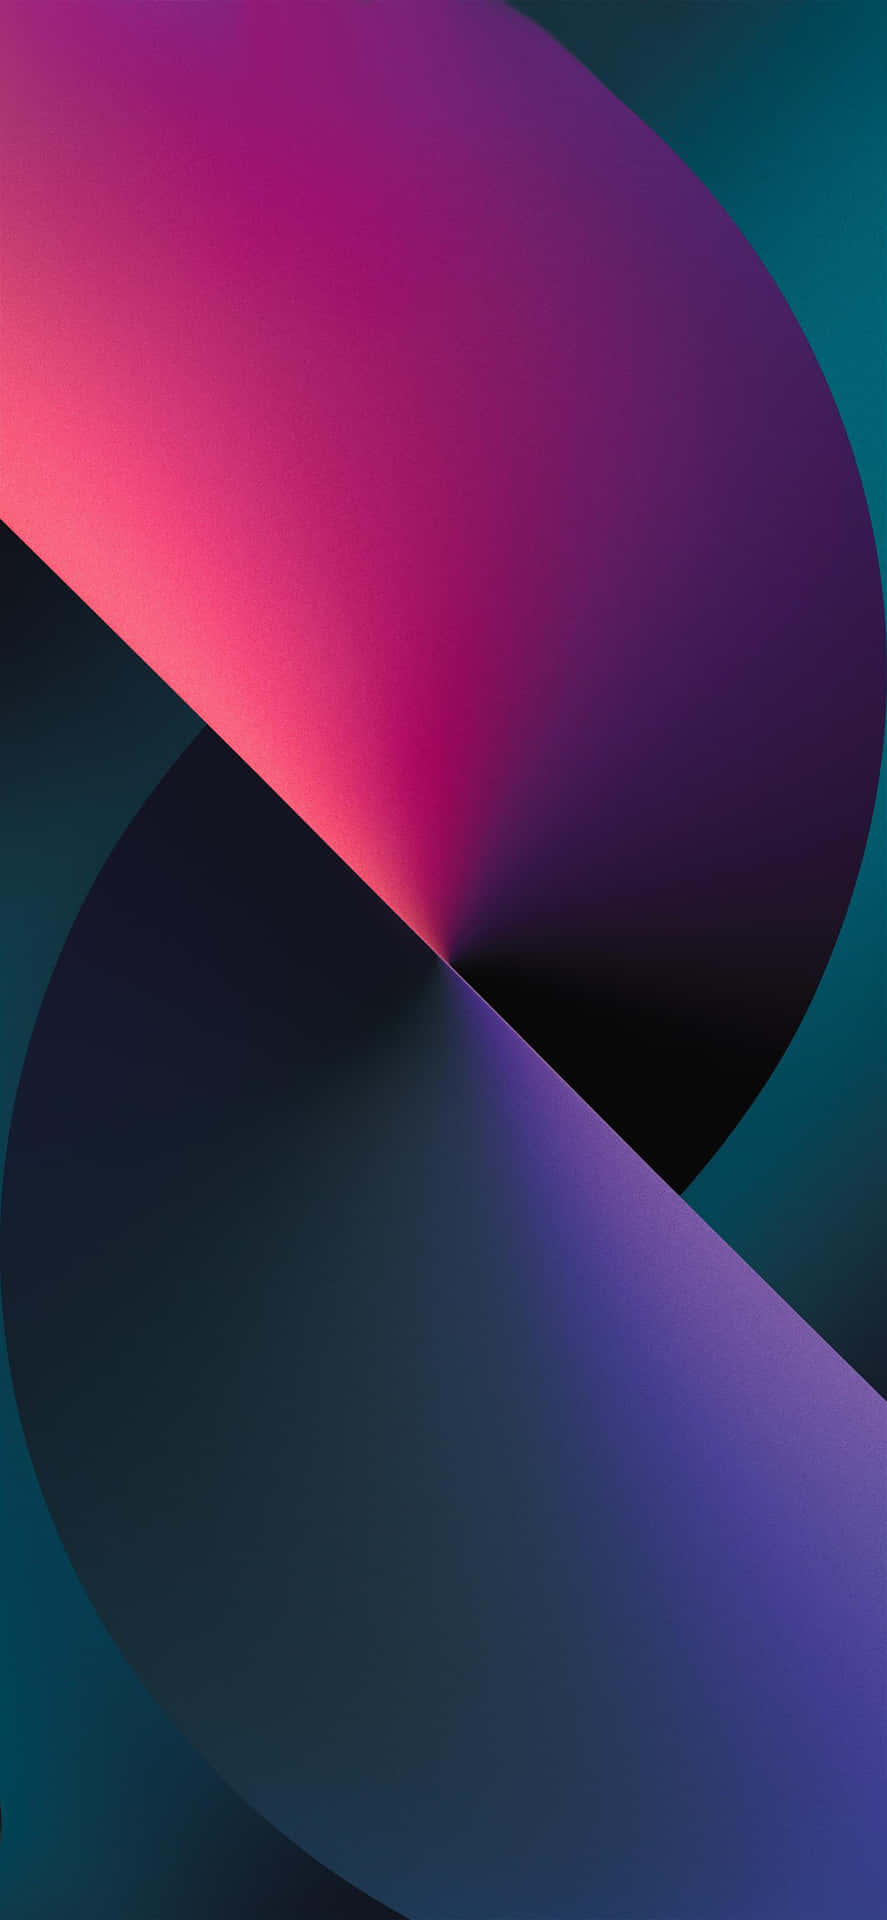 A Purple And Blue Abstract Design Wallpaper